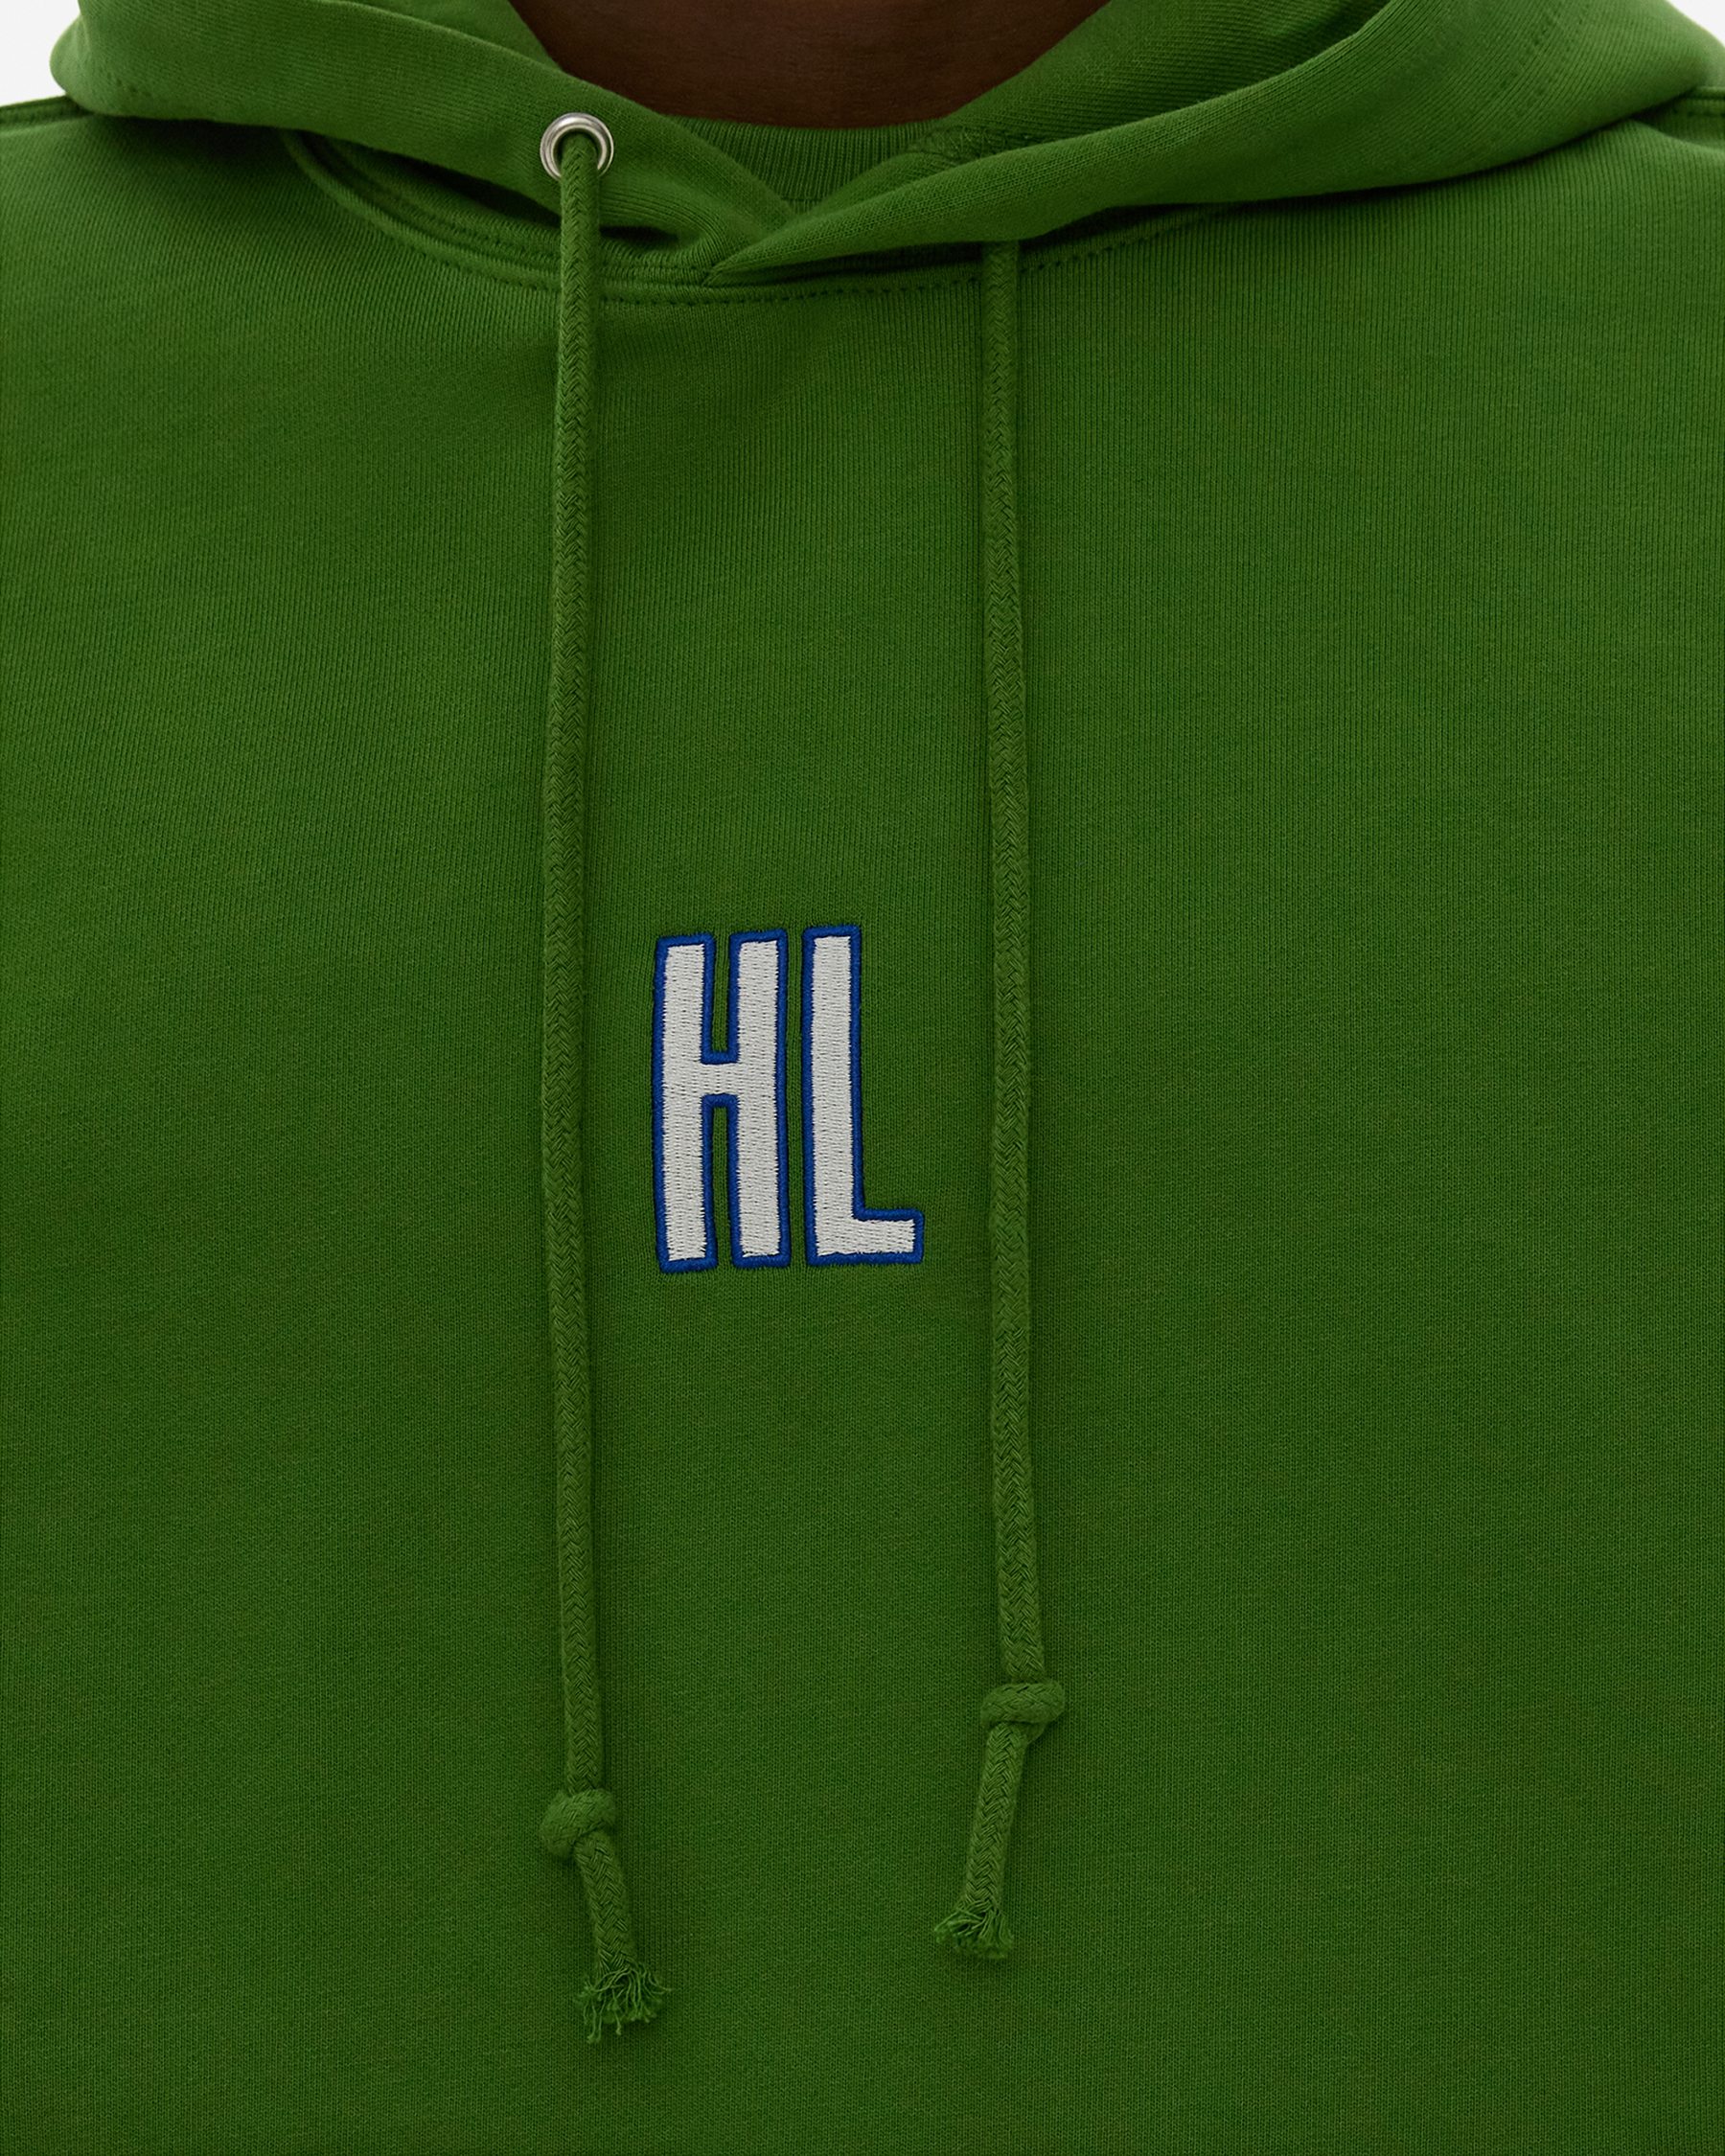 Outlined Logo Hoodie